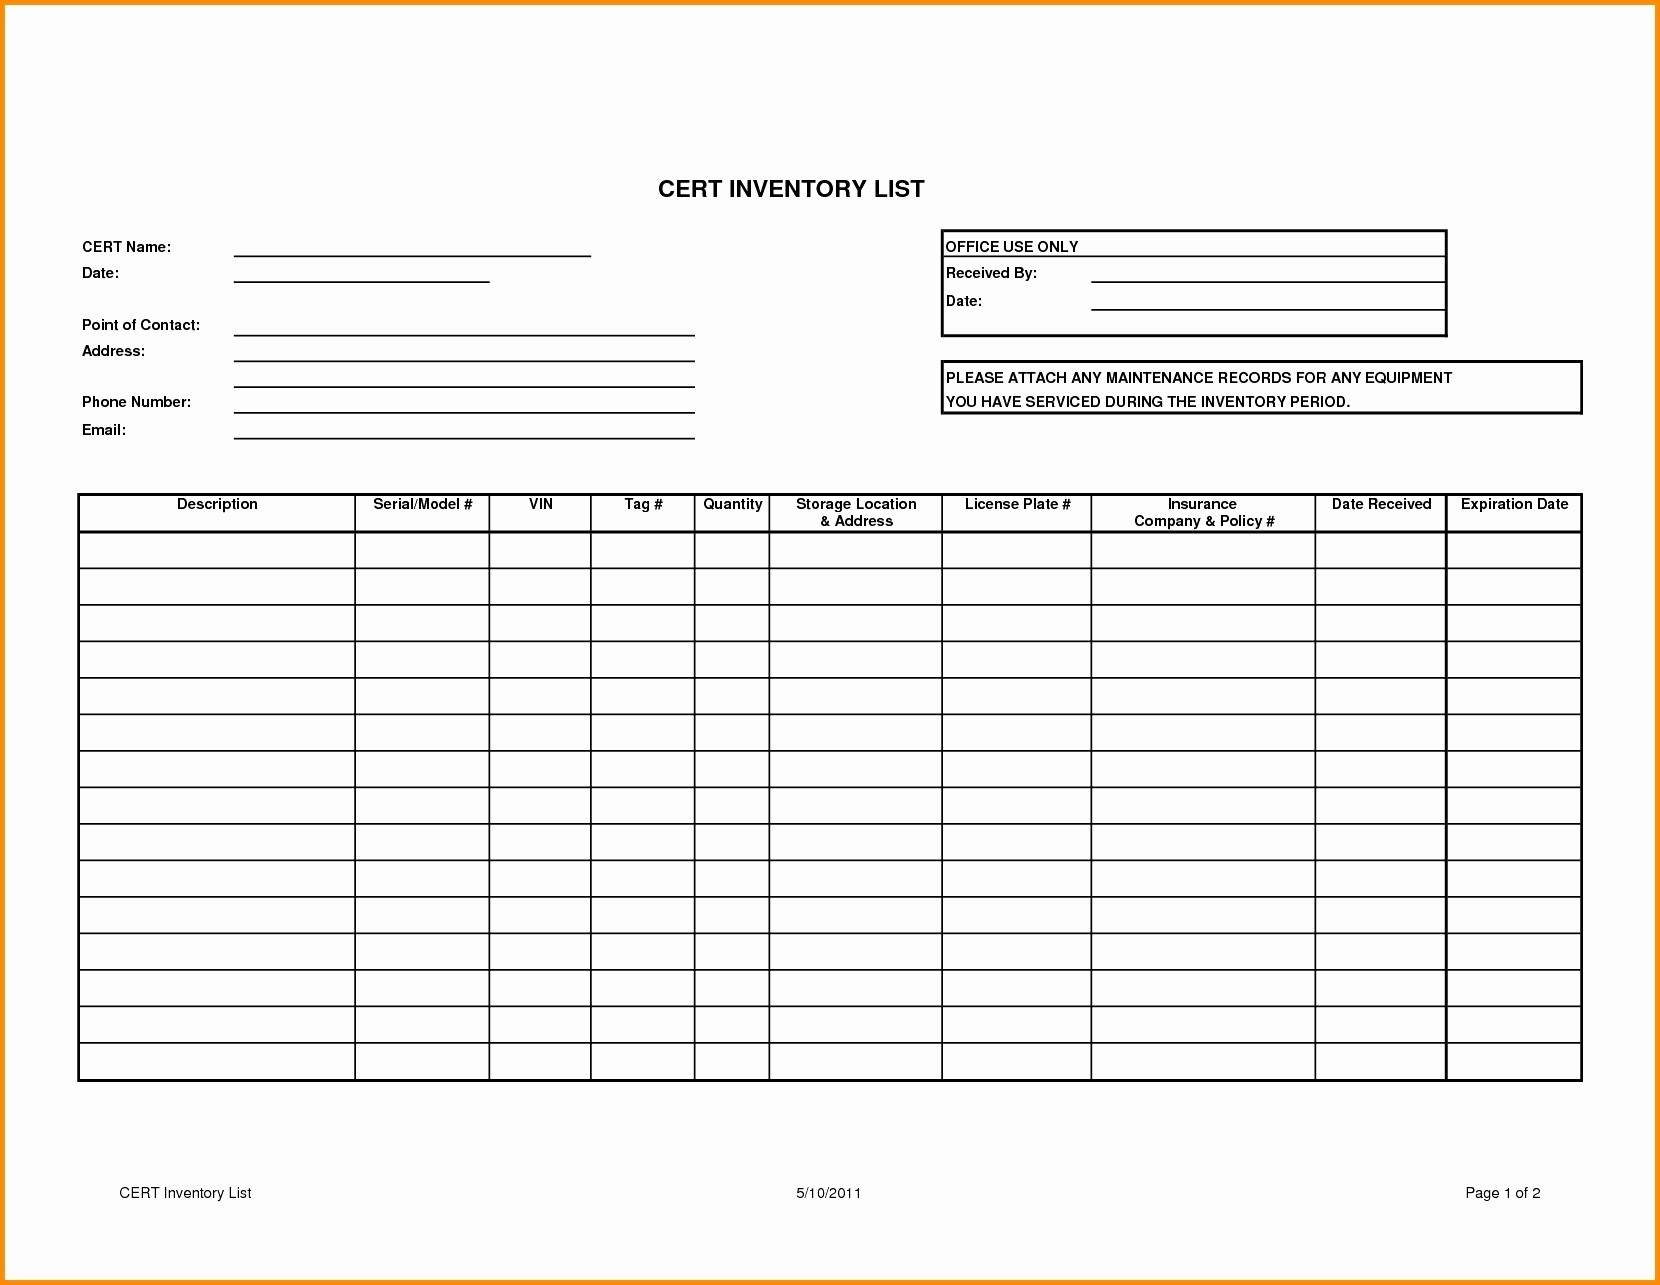 Cow Calf Inventory Spreadsheet On Free Microsoft Document